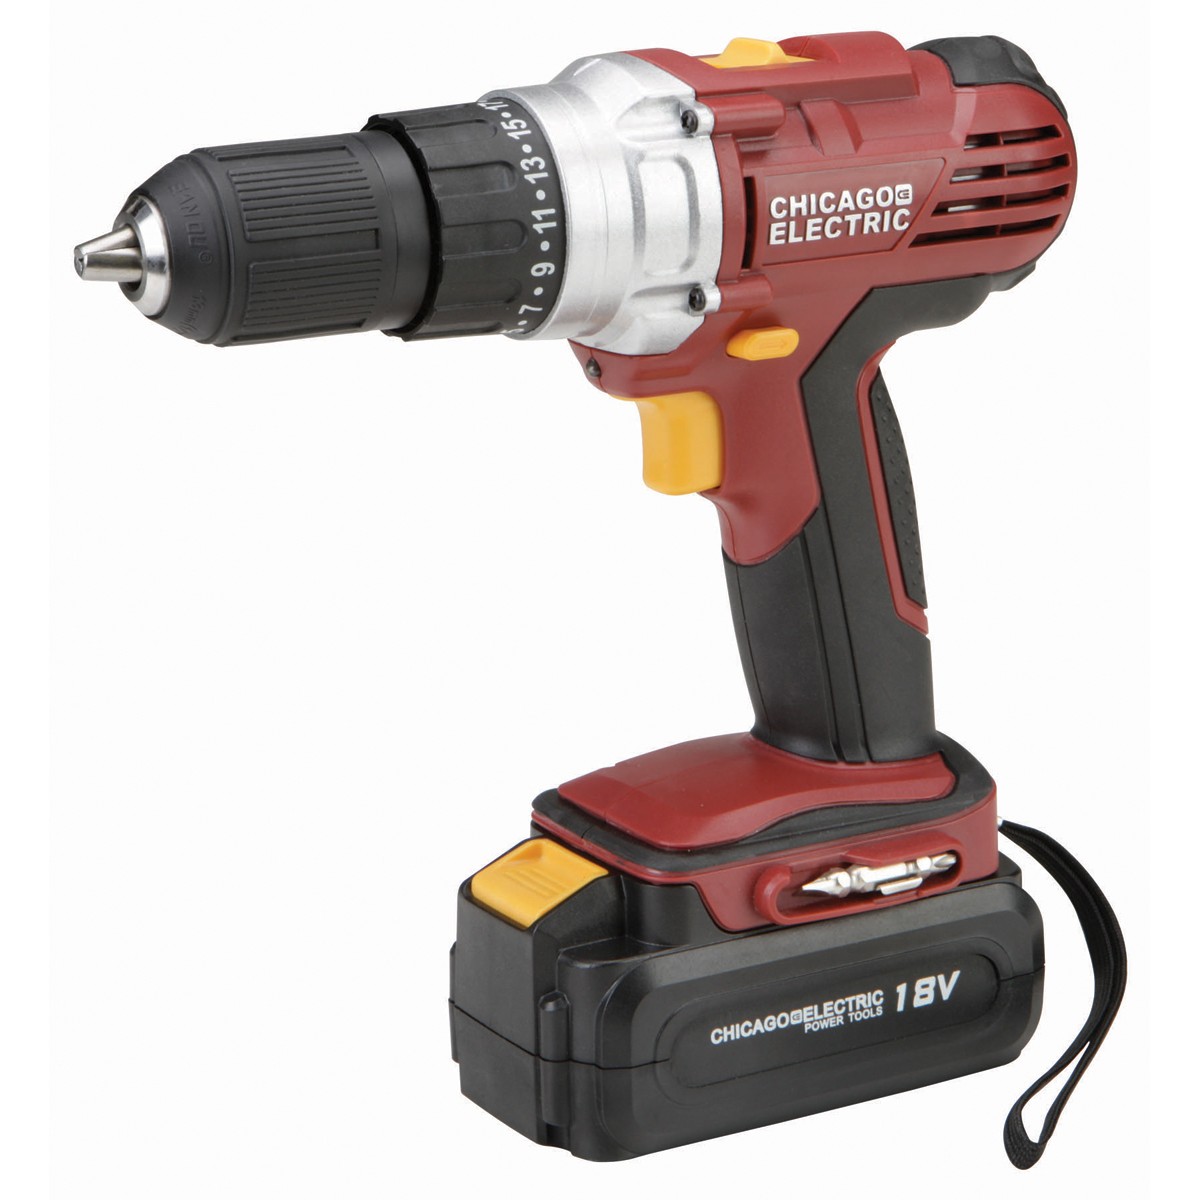 Chicago Electric Power Tools 68850 18 Volt Cordless 1/2" Drill/Driver with Keyless Chuck